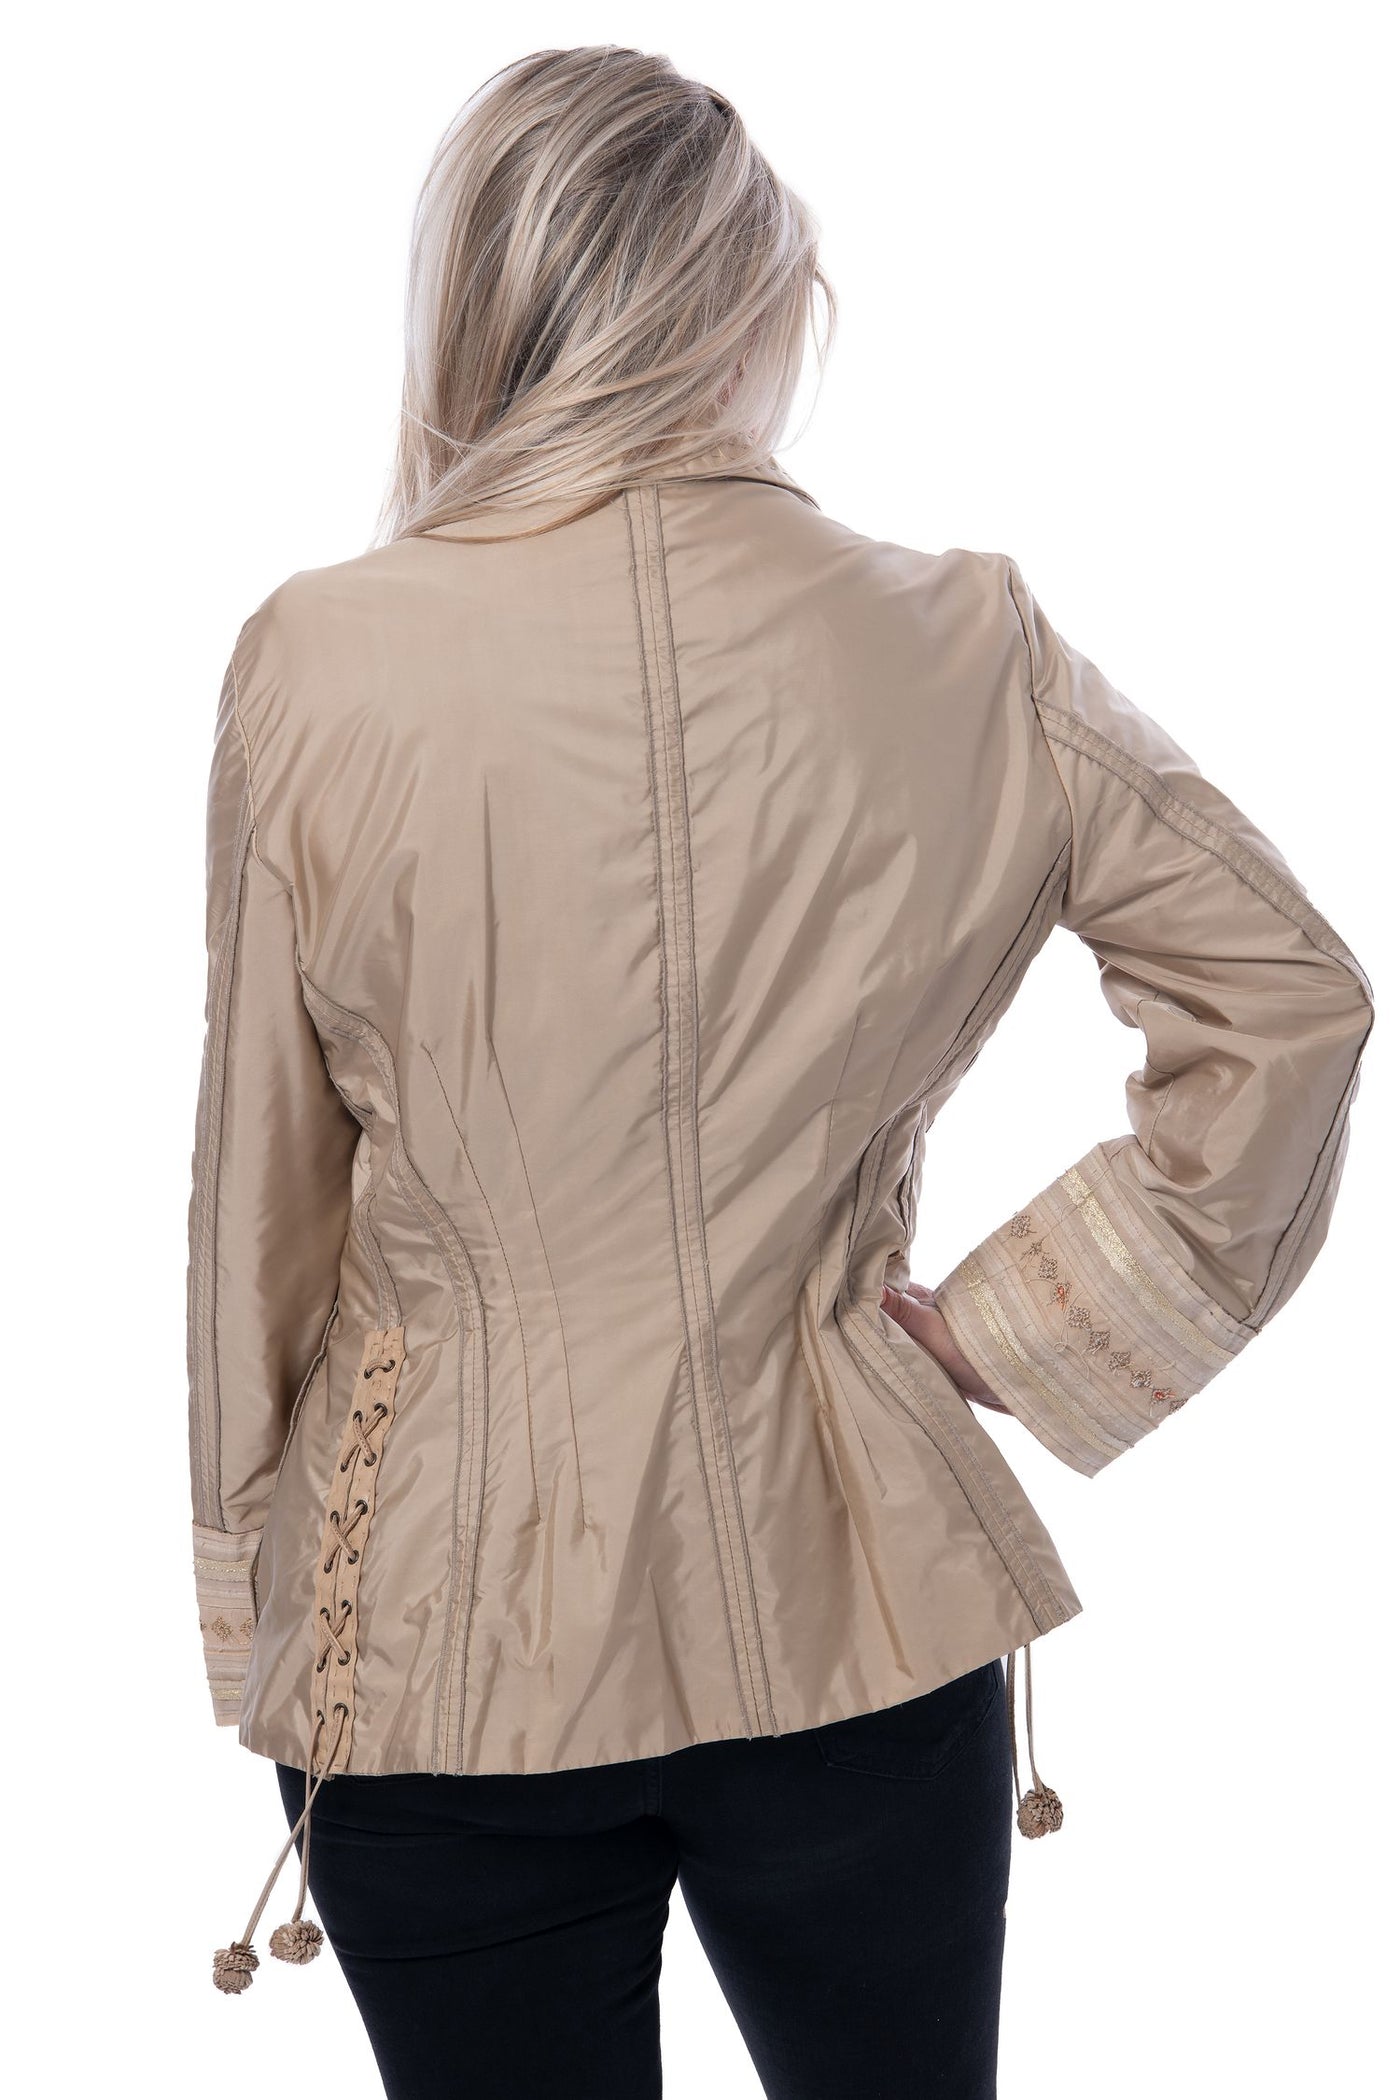 Ermanno Scervino beige jacket with embroidery